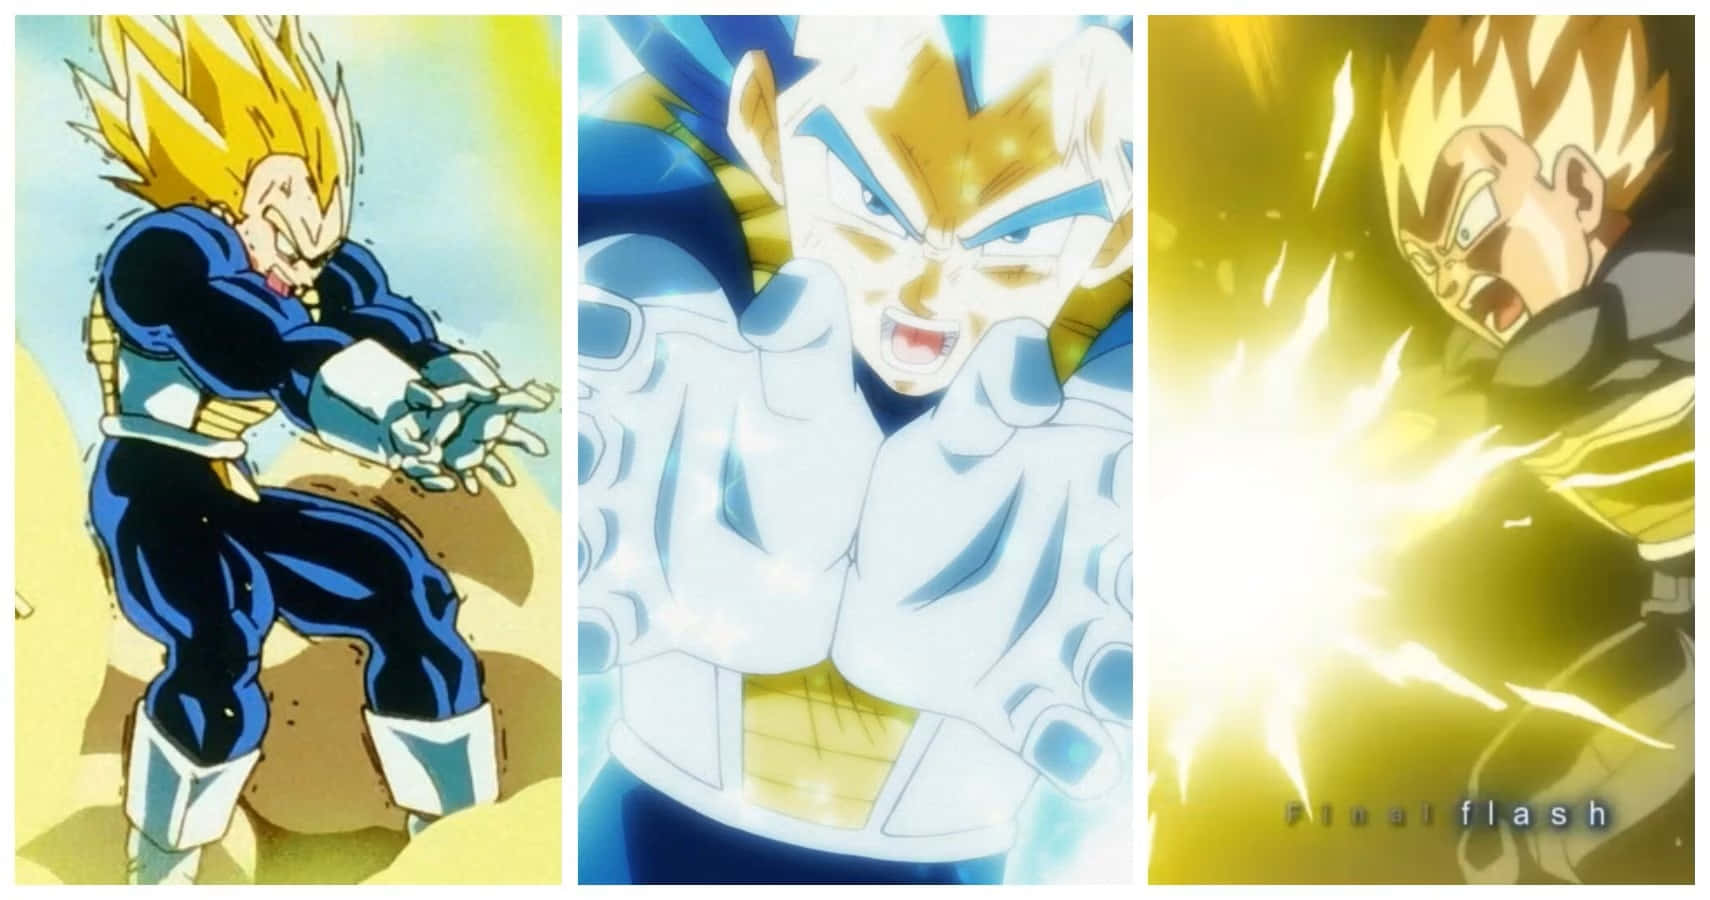 Vegeta unleashing the full power of his Final Flash attack at Cell Wallpaper